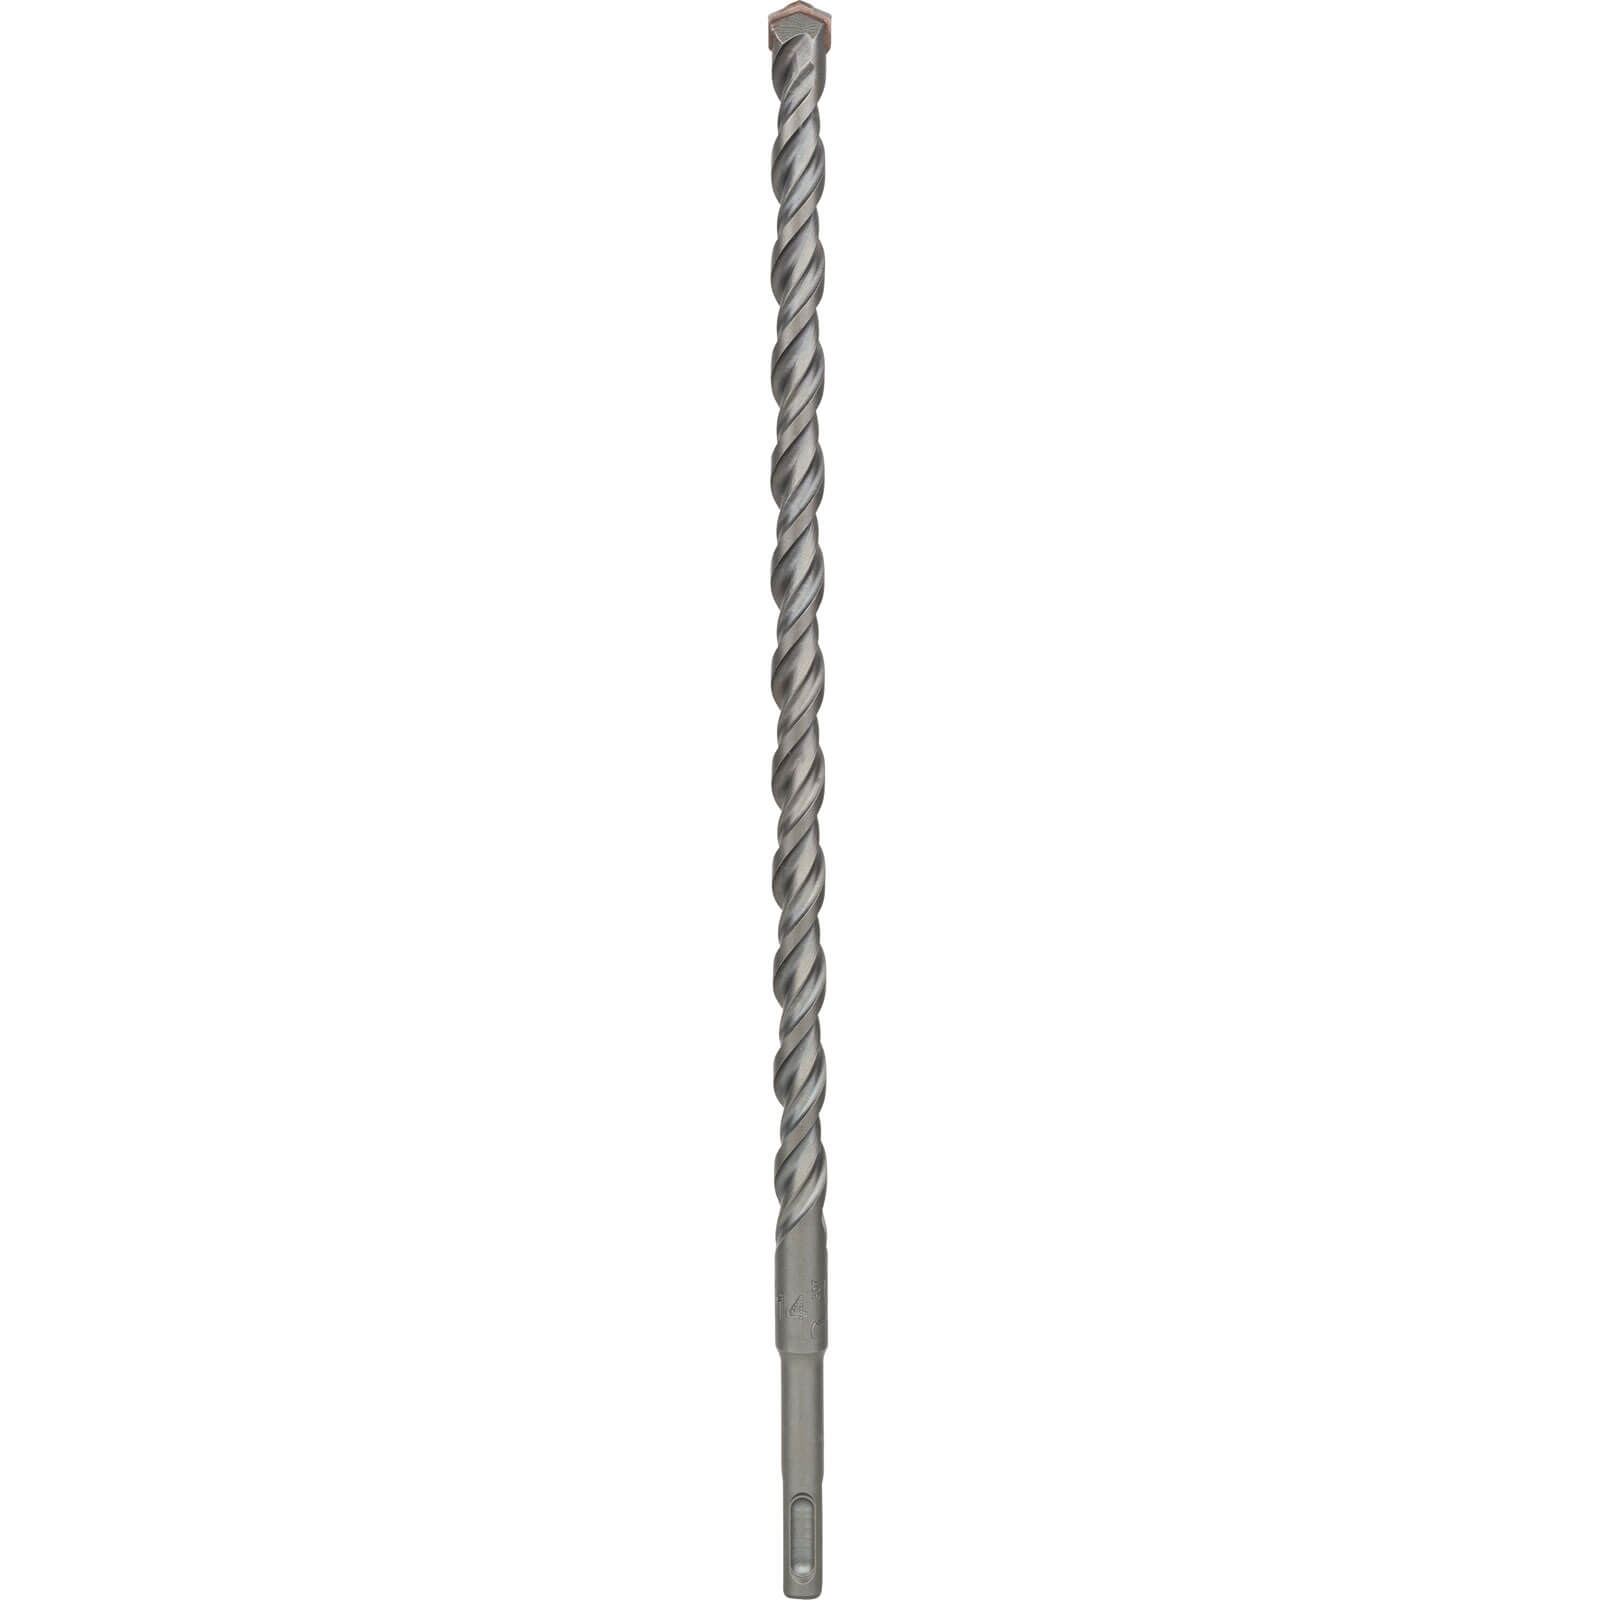 Image of Bosch Series 3 SDS Plus Masonry Drill Bit 14mm 360mm Pack of 1